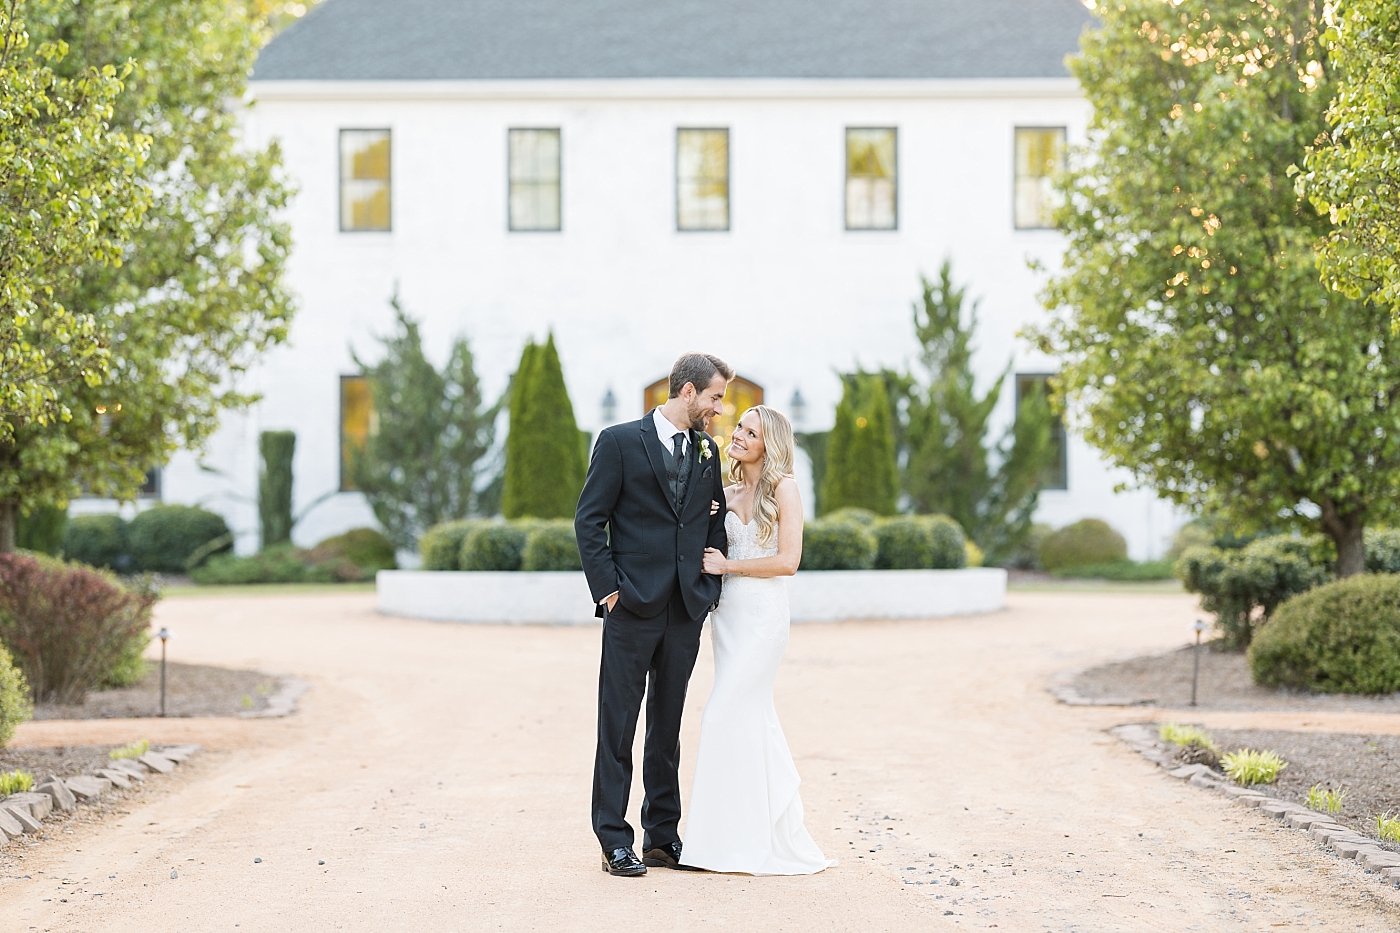 Wedding at The Bradford in New Hill, NC | Raleigh Wedding Photographer | Sarah Hinckley Photography